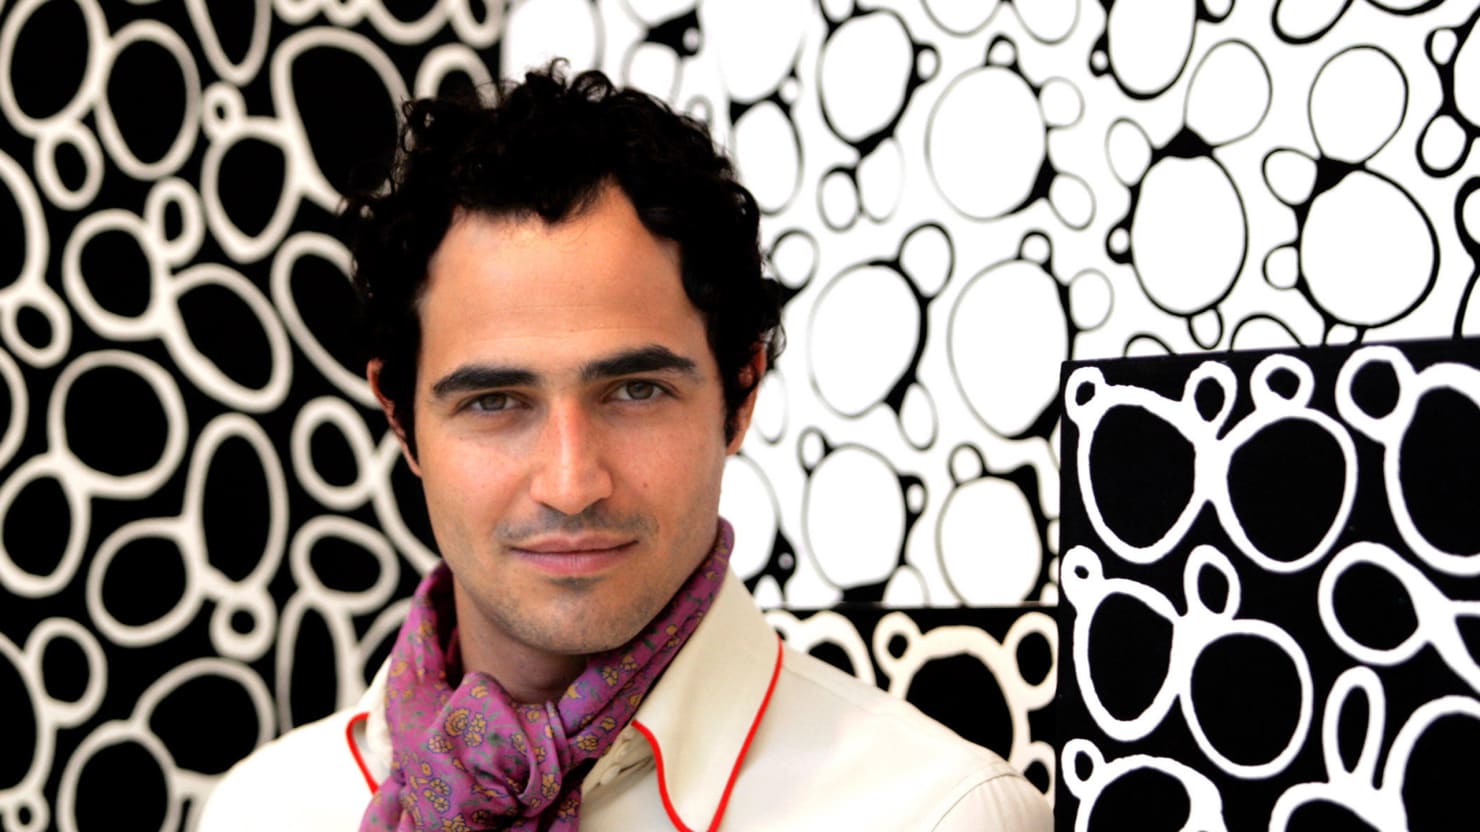 Zac Posen on Fashion, Fame, and Why He Won’t Design Clothes For Ivanka